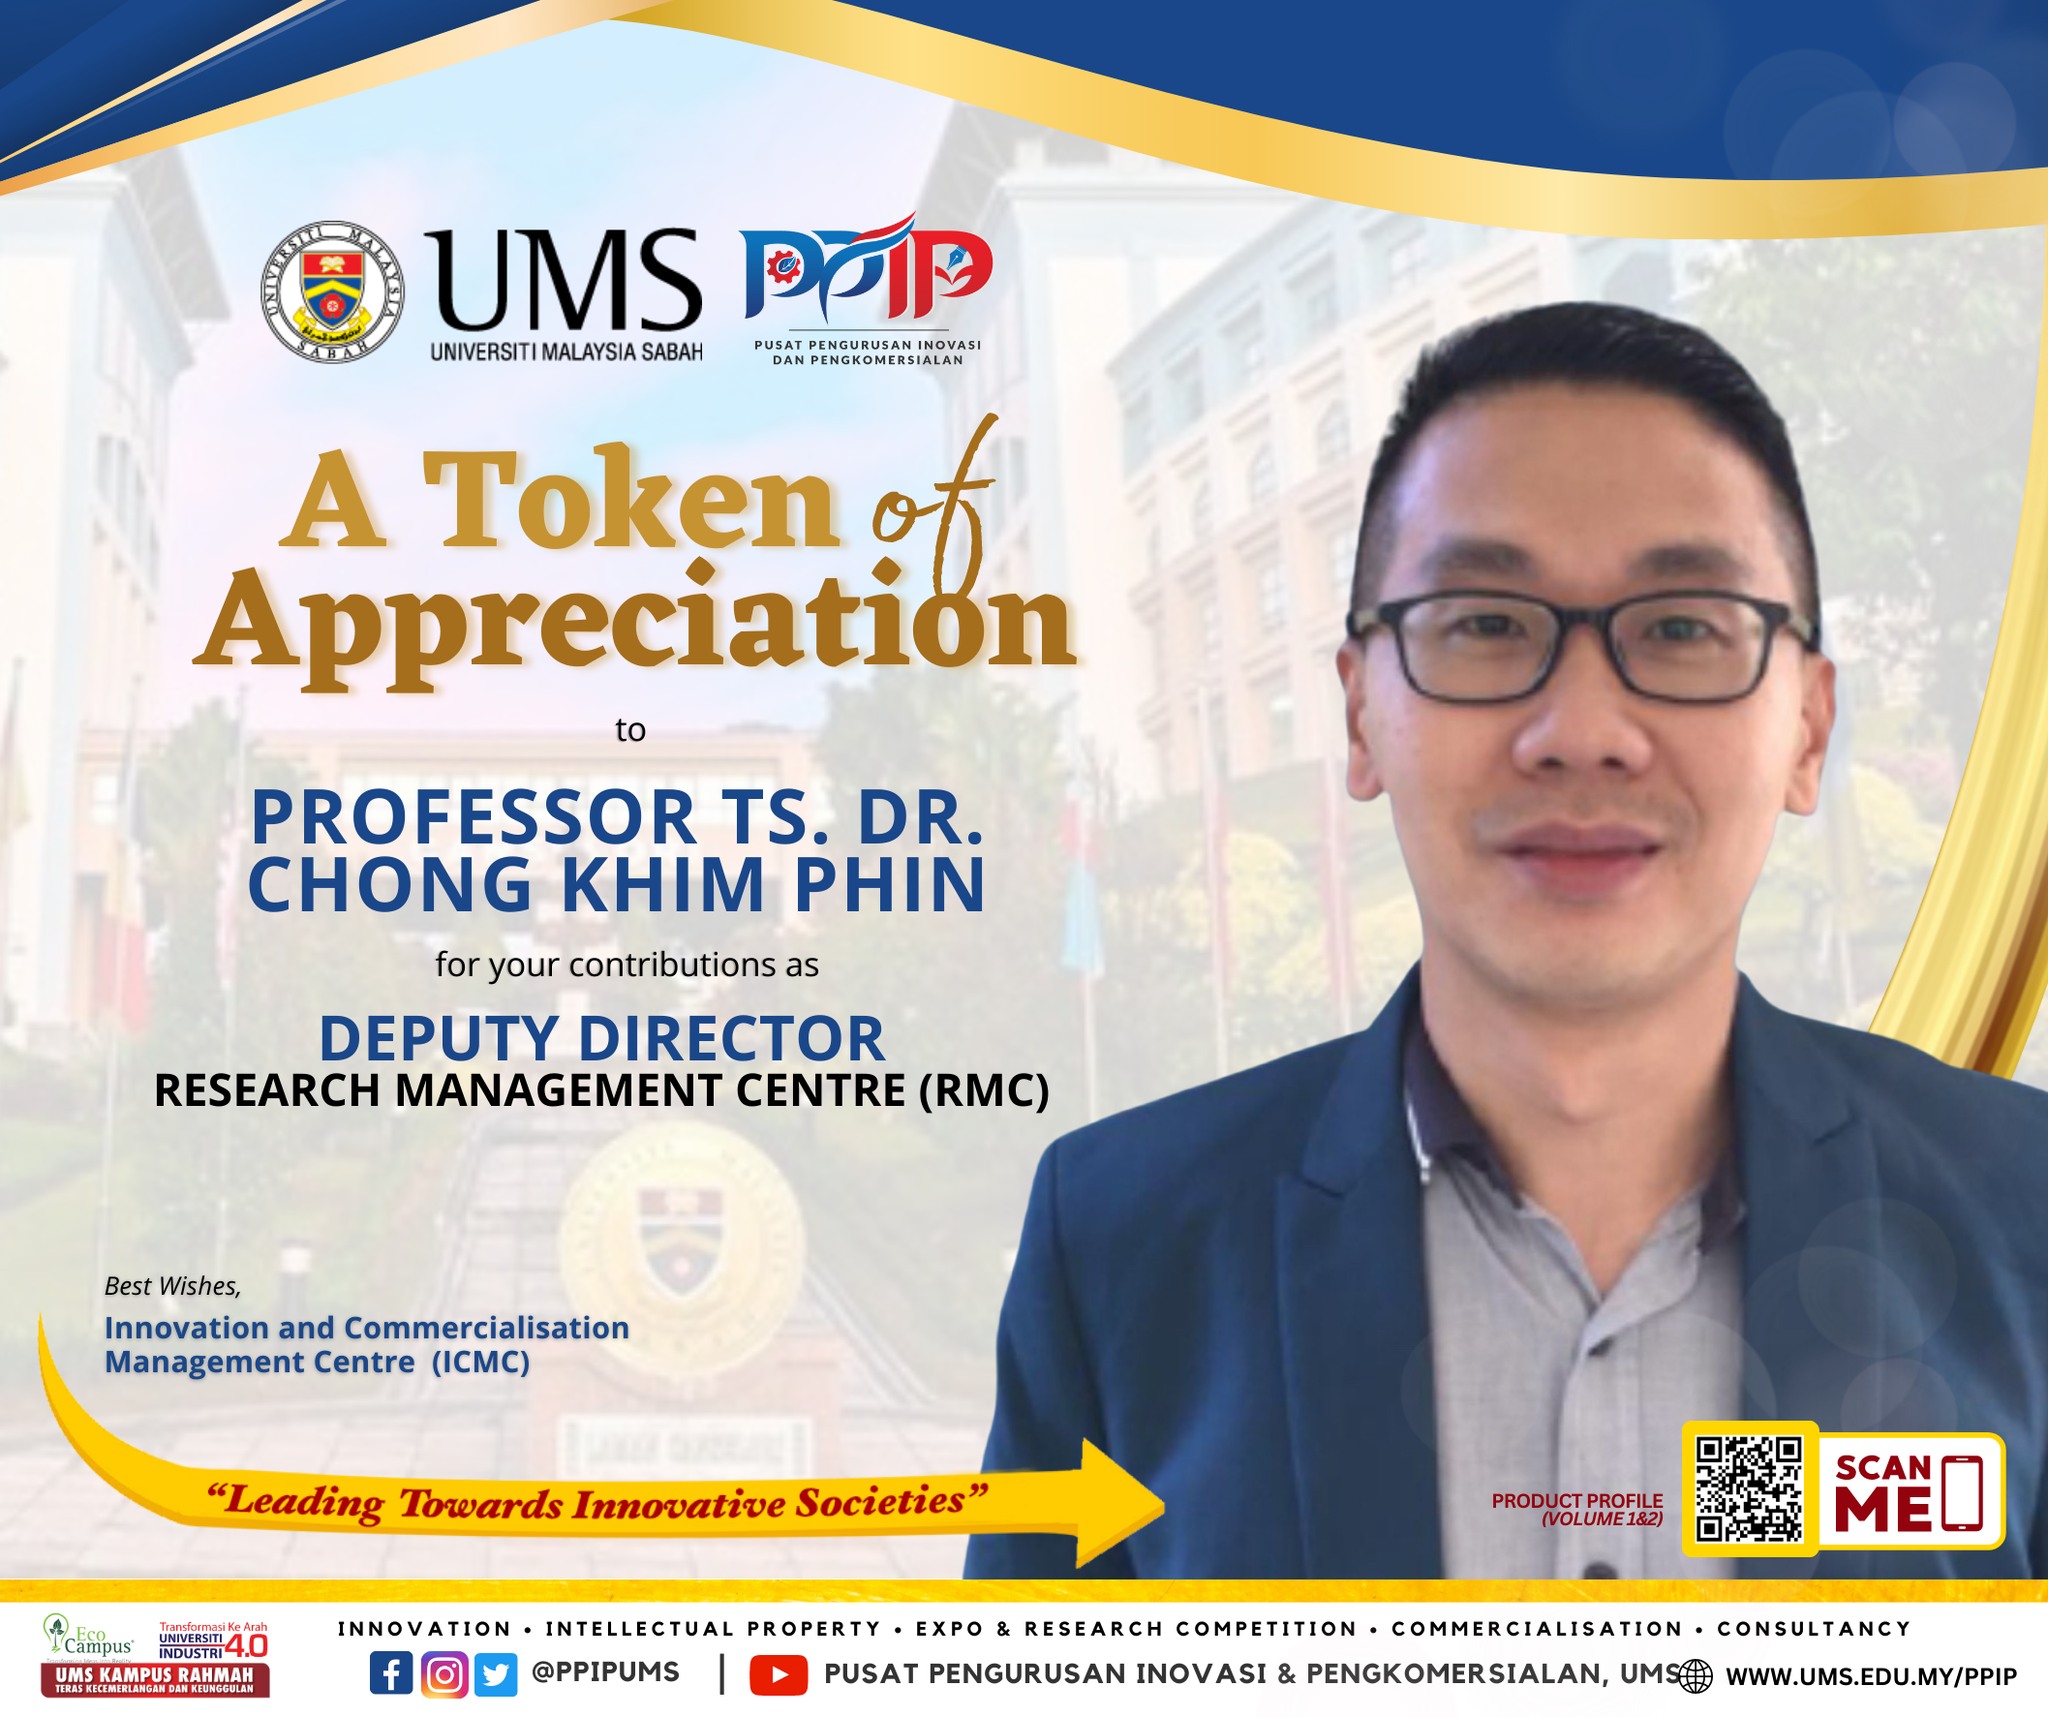 A Token of Appreciation to Professor Ts. Dr. Chong Khim Phin for your contributions as the Deputy Director of RMC, UMS!